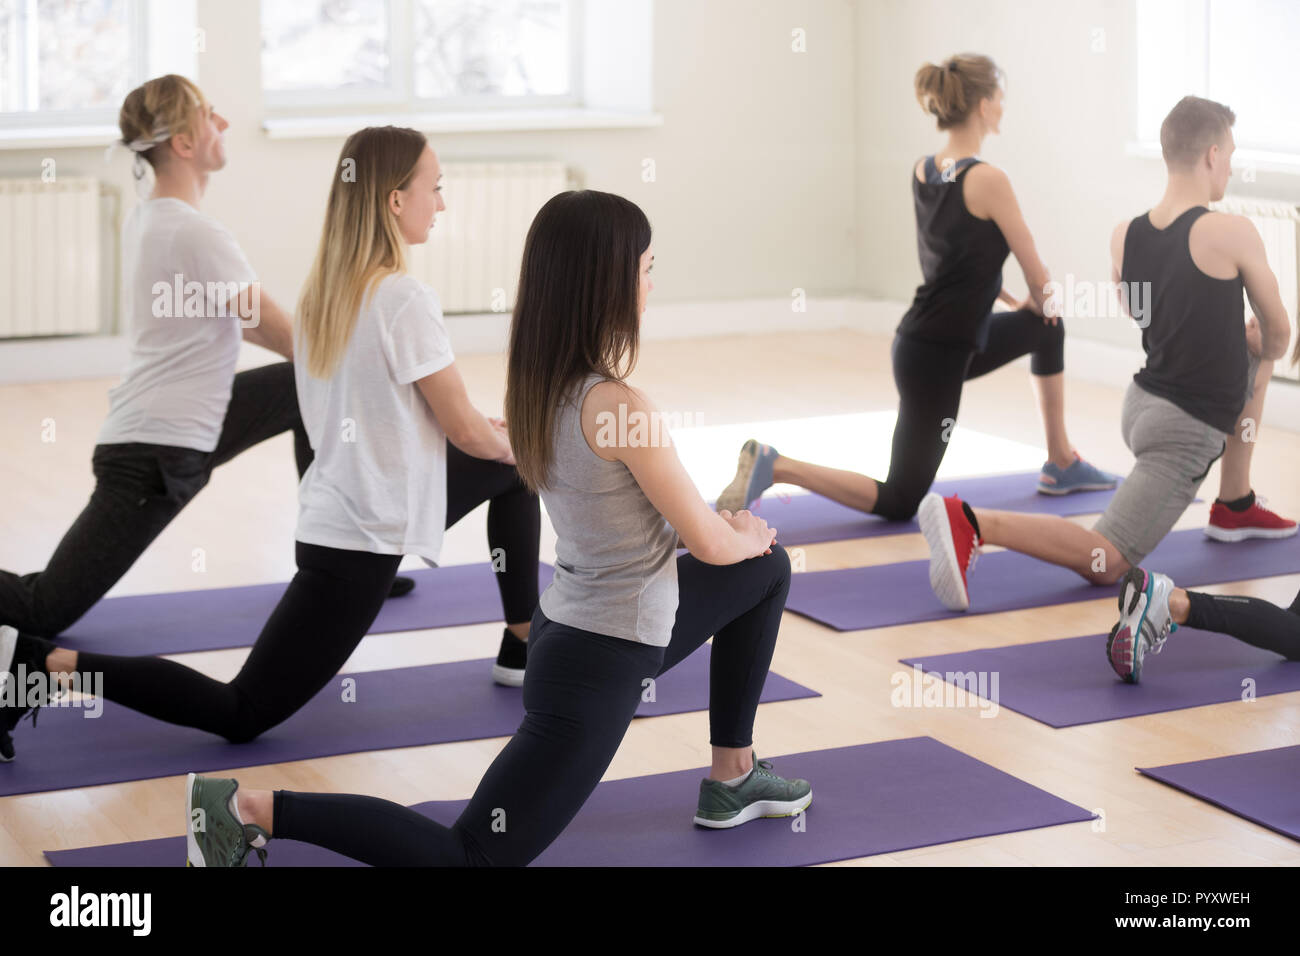 Group of people doing squat standing on rubber mats Stock Photo